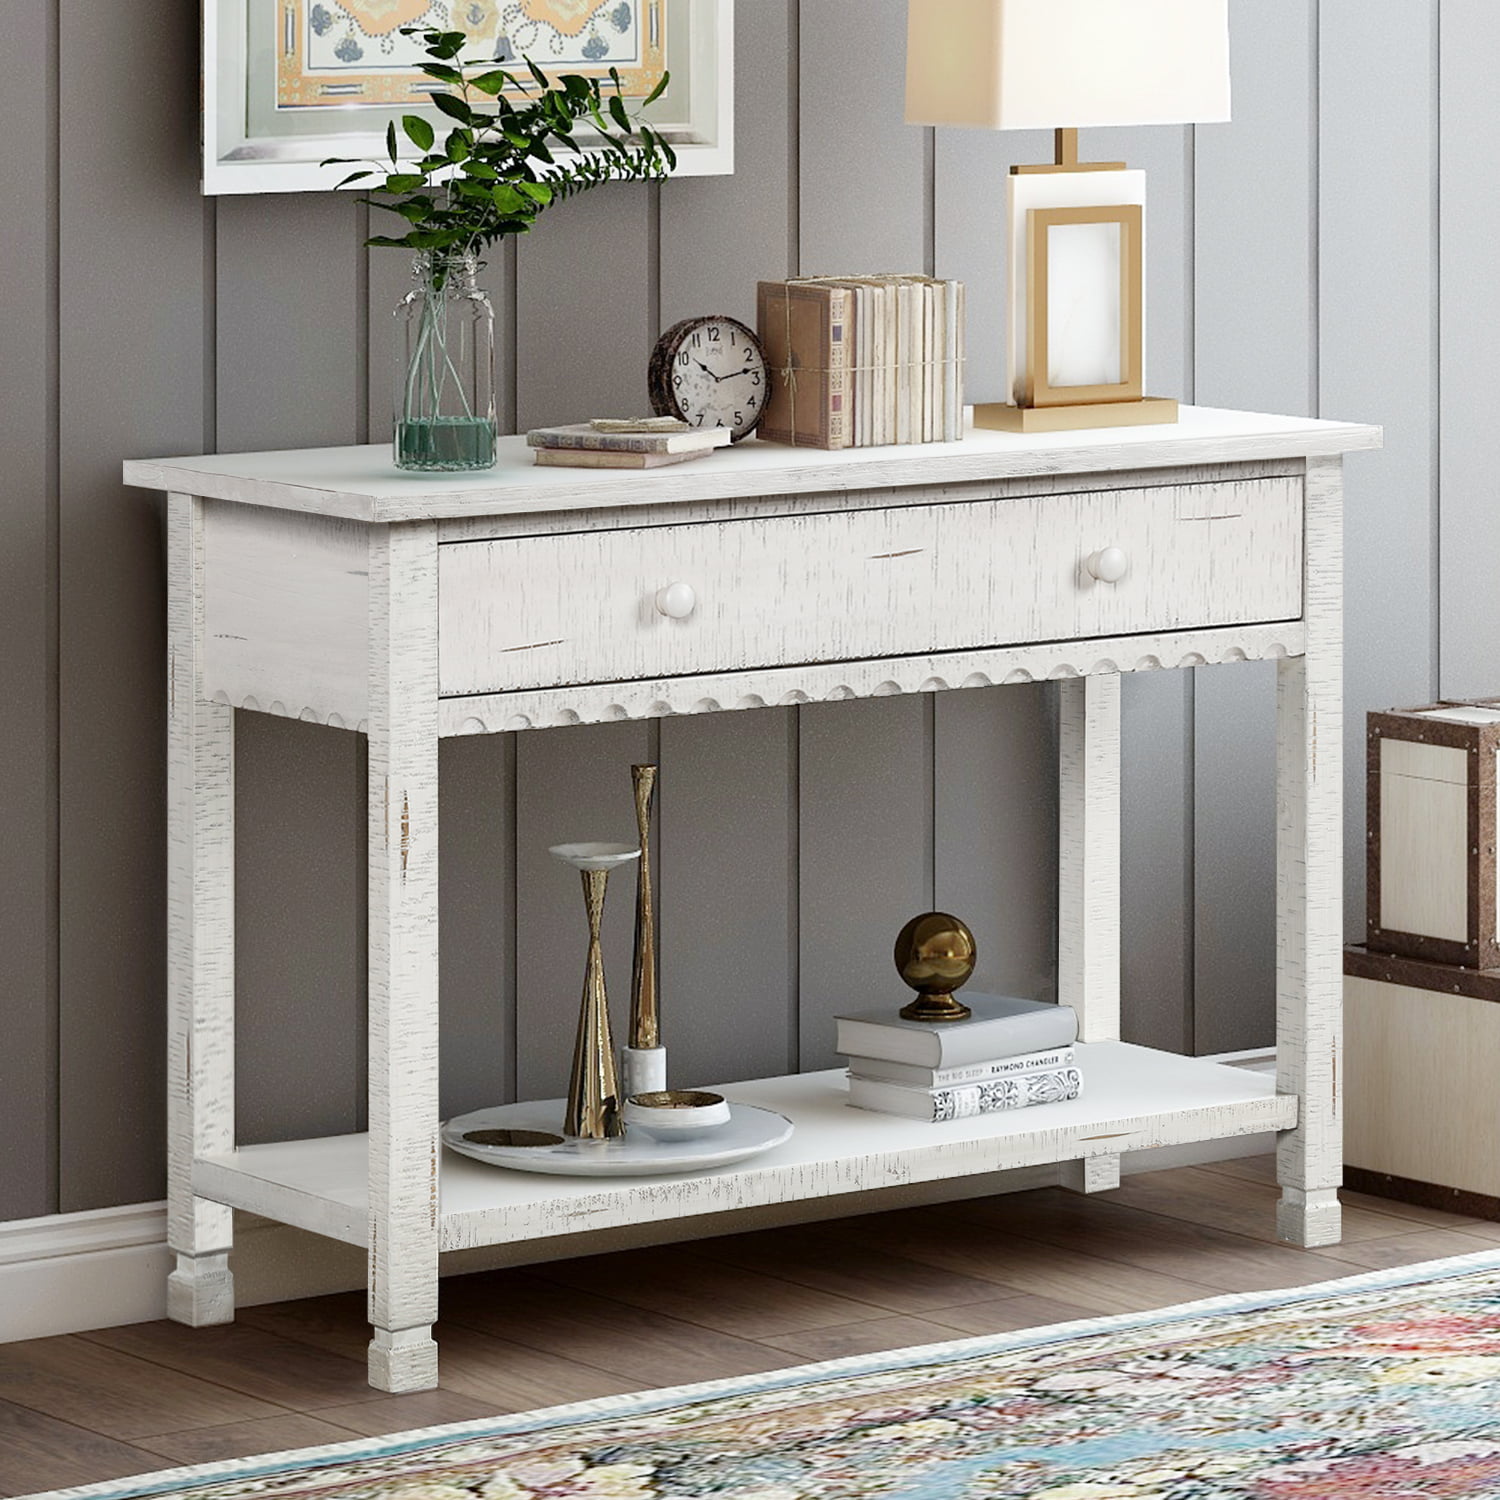 Console Sofa Table with Drawers, BTMWAY Wooden Rustic Narrow Entrance